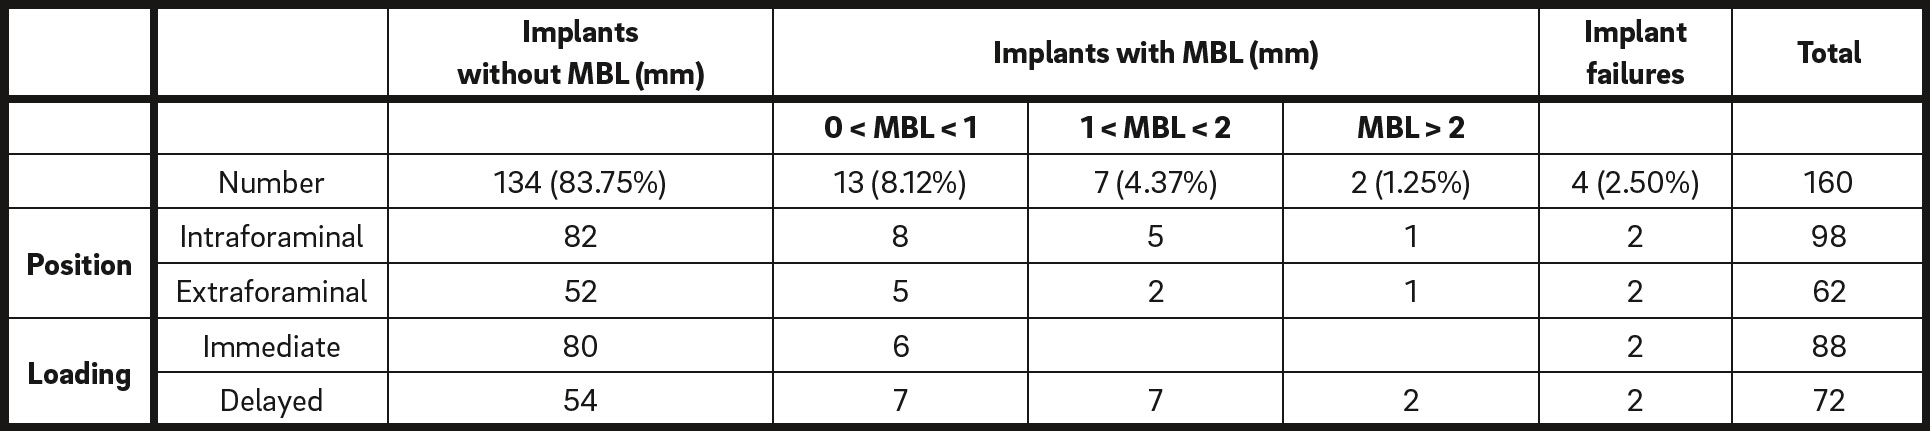 Table 2 Implant-based variables according to marginal bone loss (MBL) and implant failure.